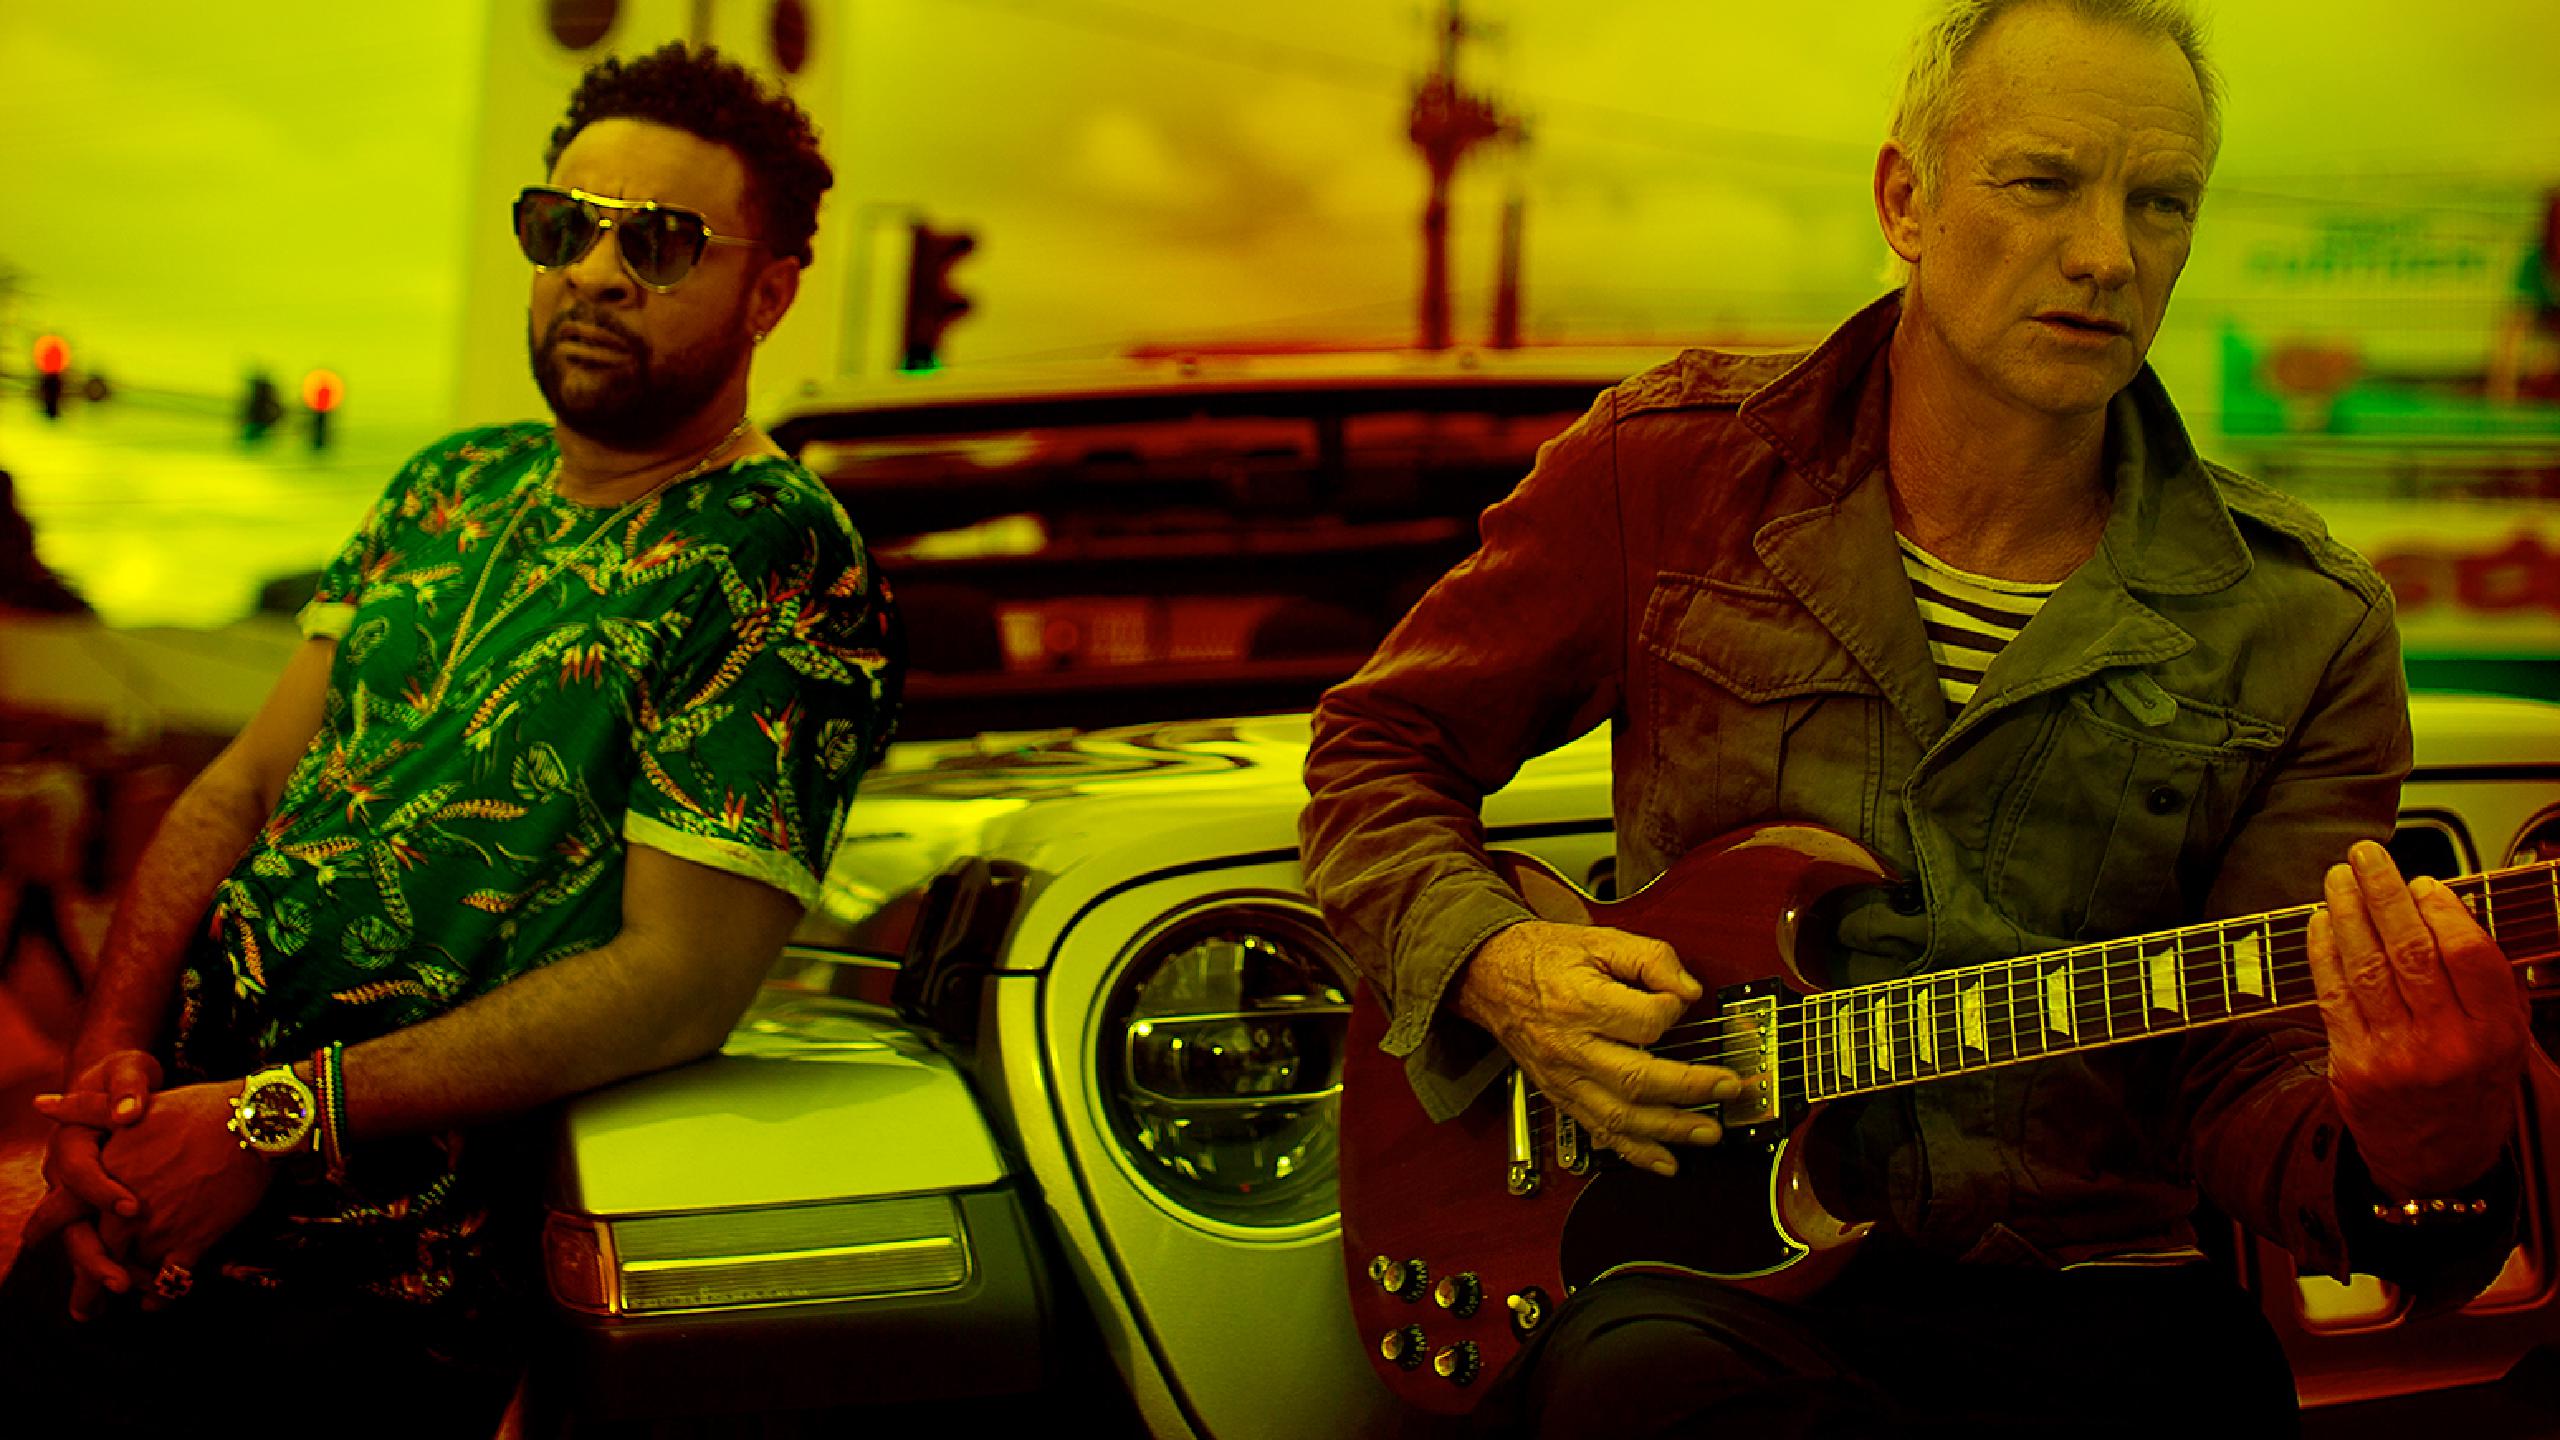 Sting & Shaggy tour dates 2022 2023. Sting & Shaggy tickets and